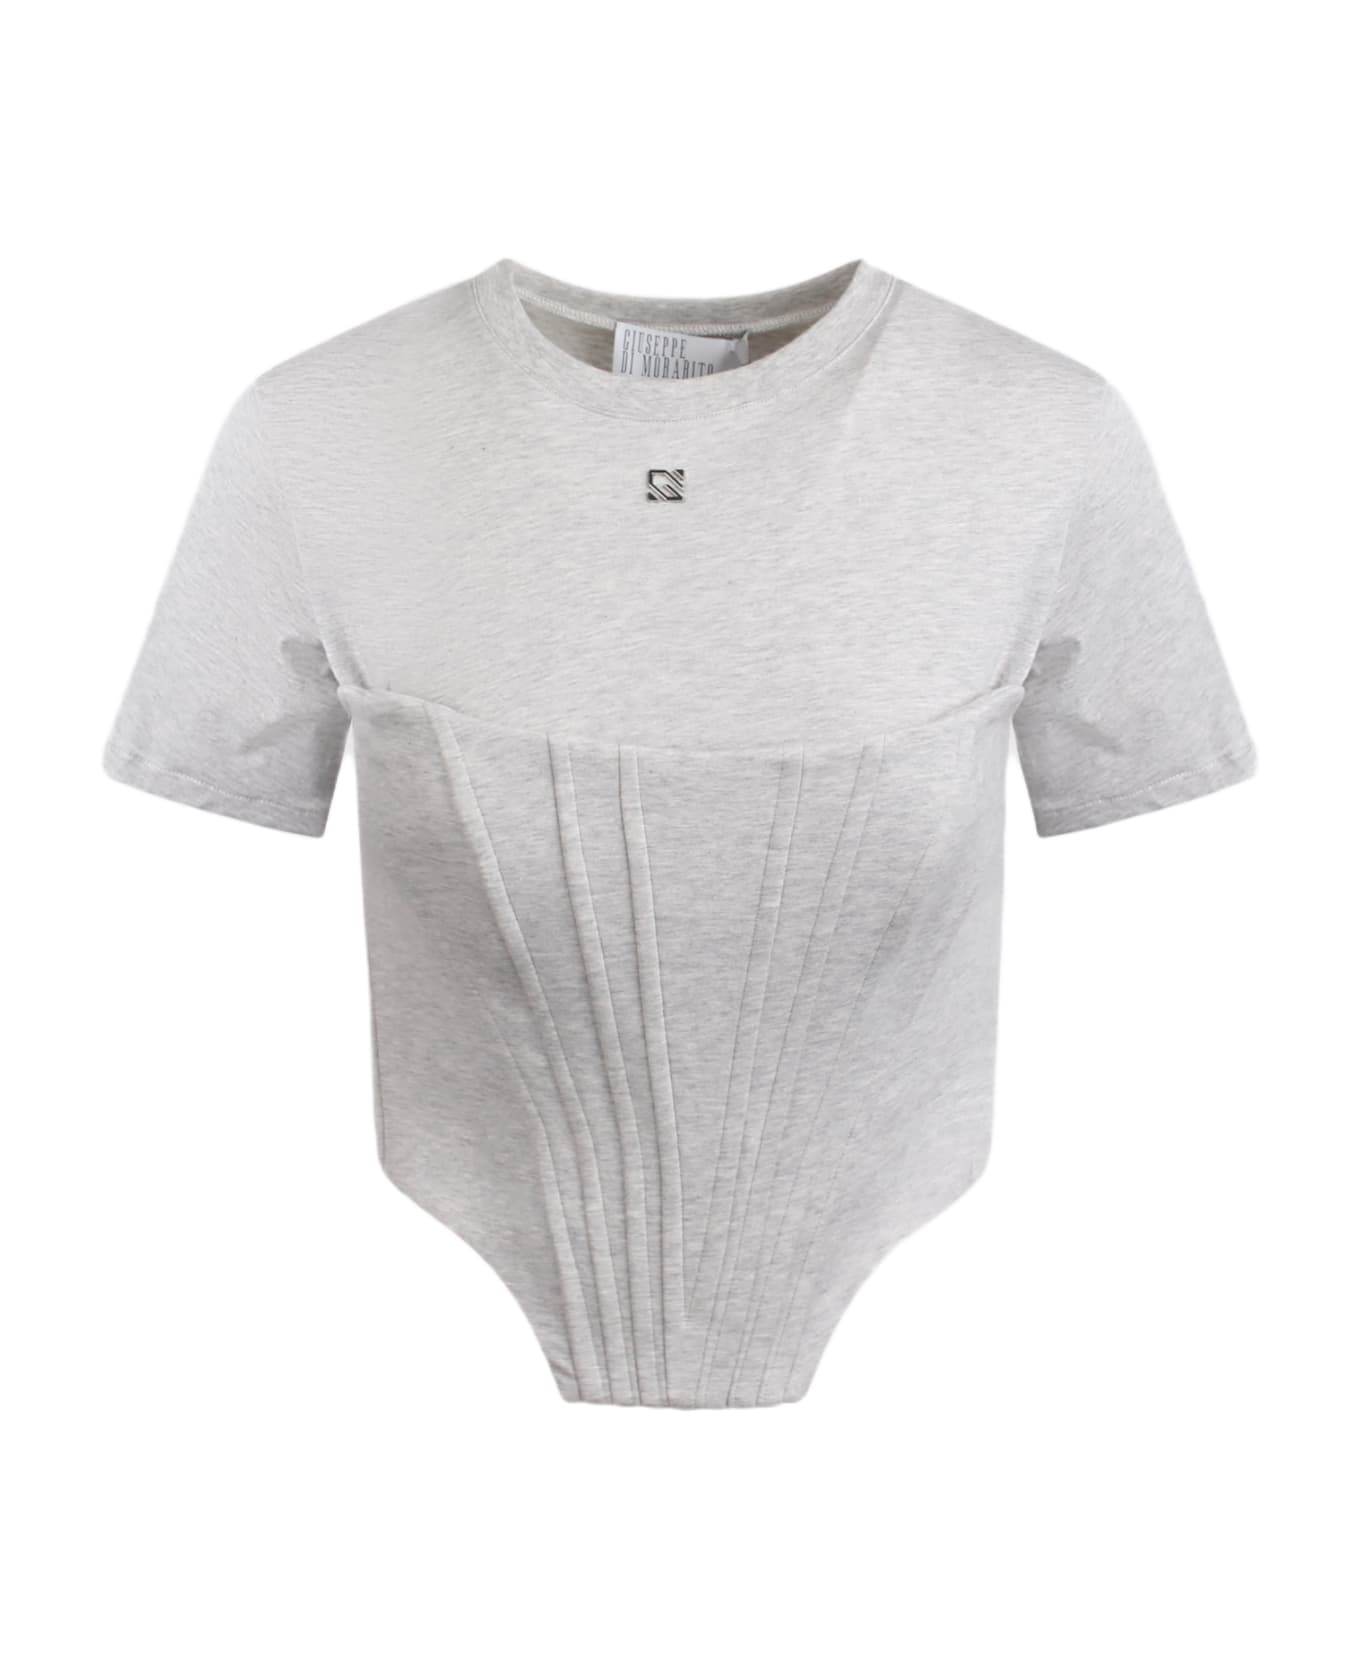 Giuseppe di Morabito T-shirt With Bustier Detail In Cotton Jersey Tシャツ